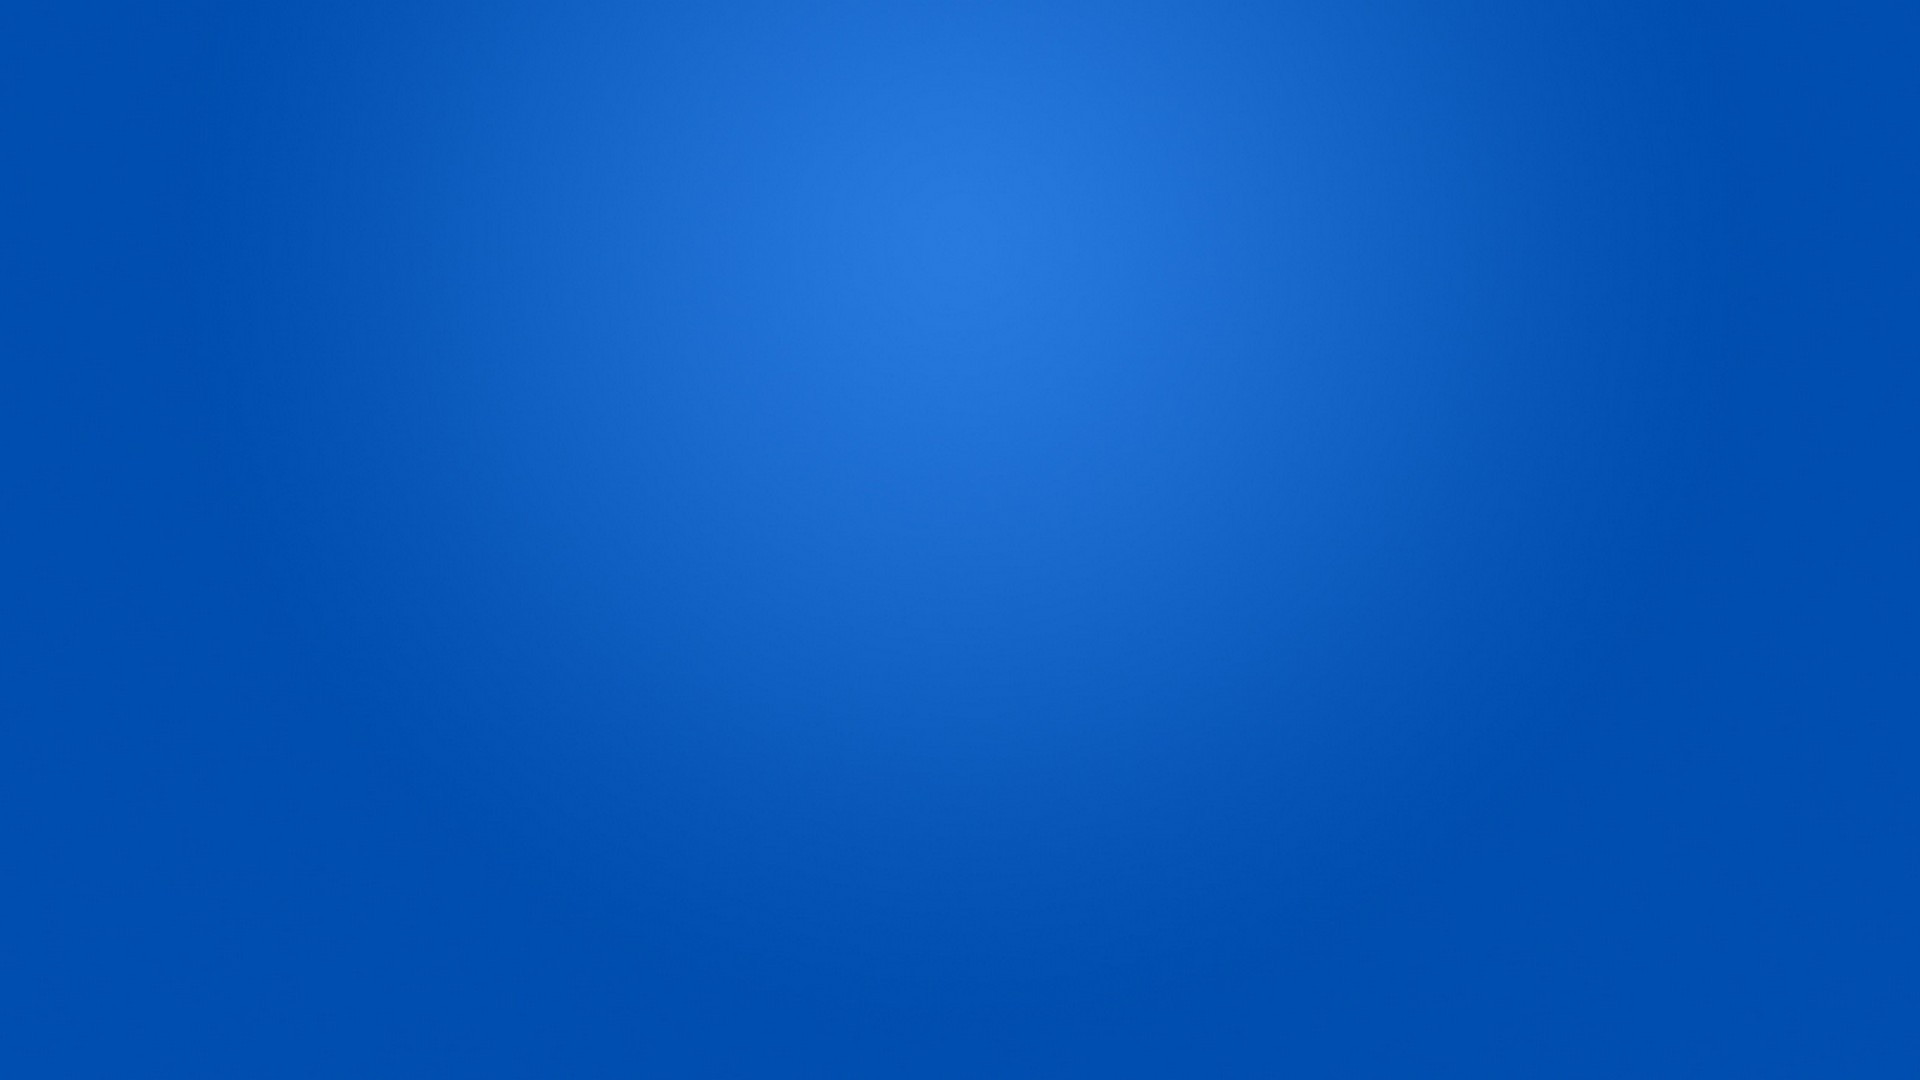 Best Blue Wallpaper With high-resolution 1920X1080 pixel. You can use this wallpaper for your Windows and Mac OS computers as well as your Android and iPhone smartphones